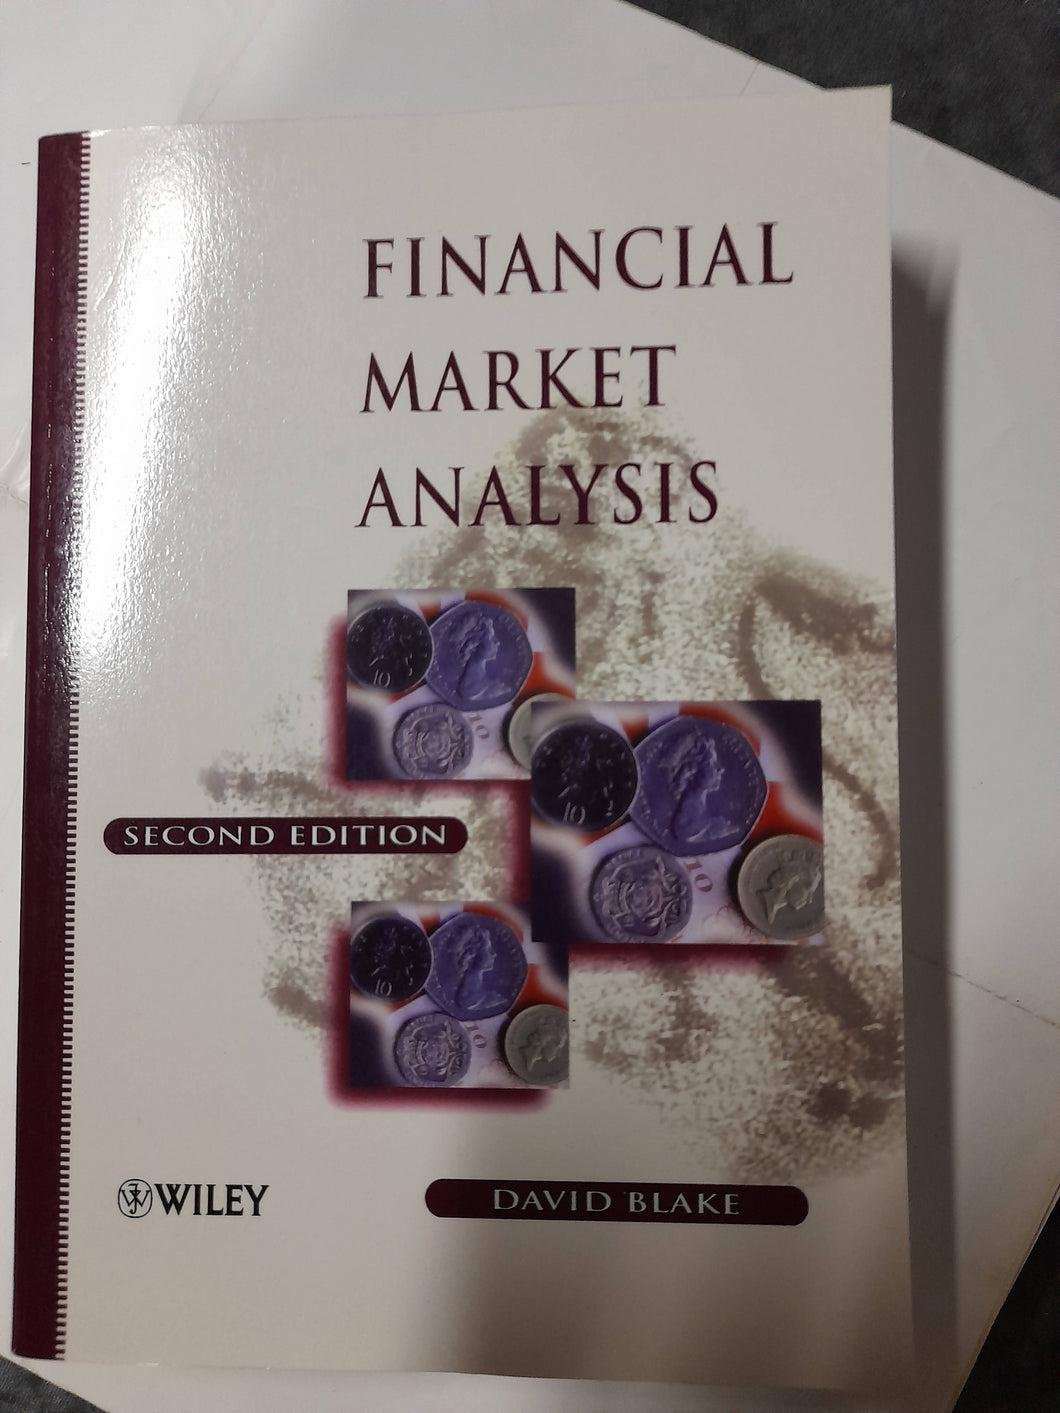 Financial Market Analysis second edition